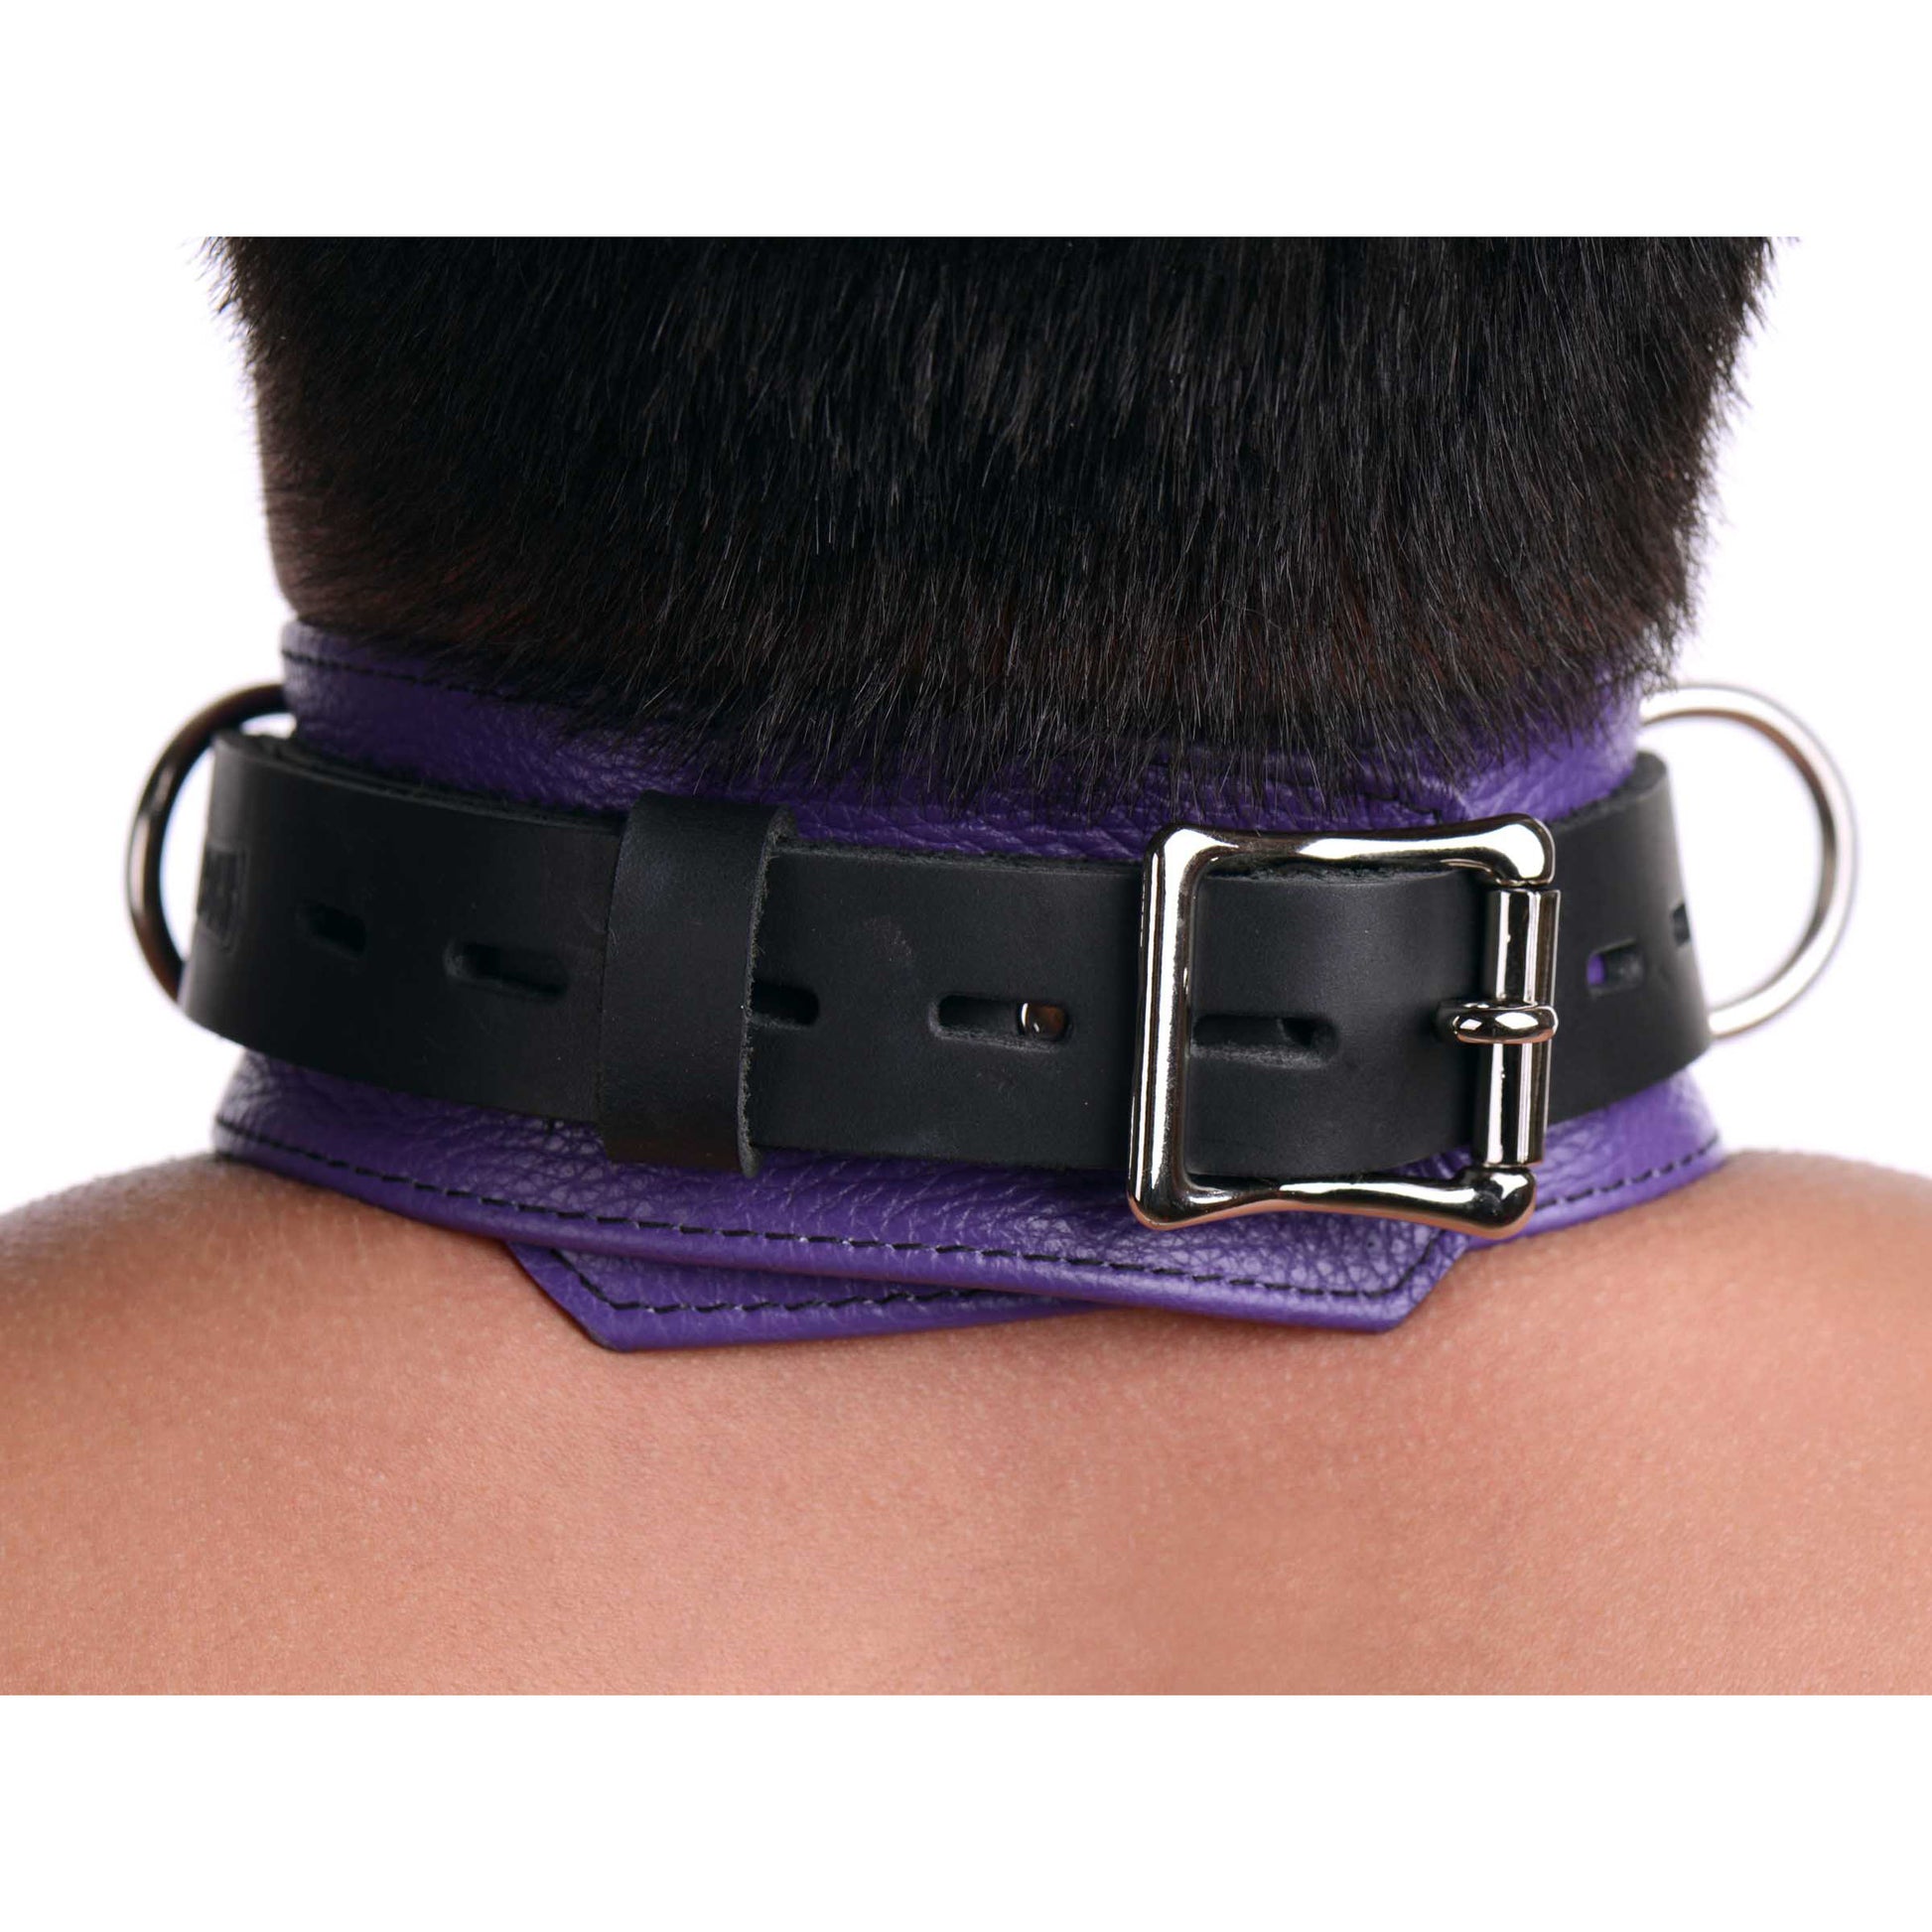 Strict Leather Deluxe Locking Collar - Purple and Black - UABDSM